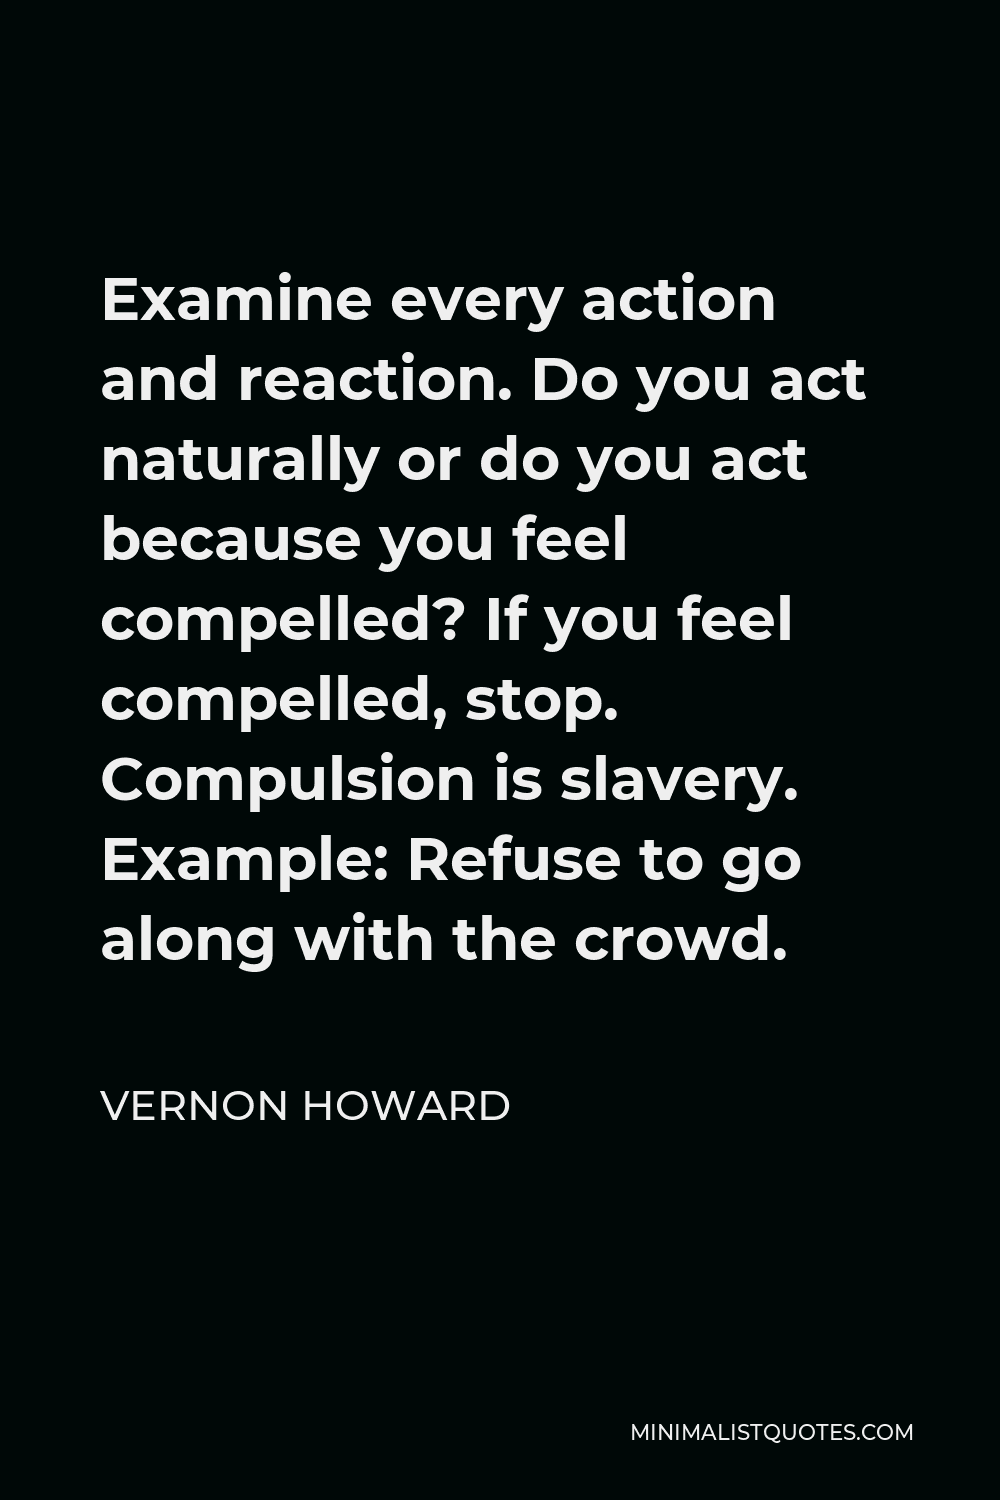 Vernon Howard Quote - Examine every action and reaction. Do you act naturally or do you act because you feel compelled? If you feel compelled, stop. Compulsion is slavery. Example: Refuse to go along with the crowd.